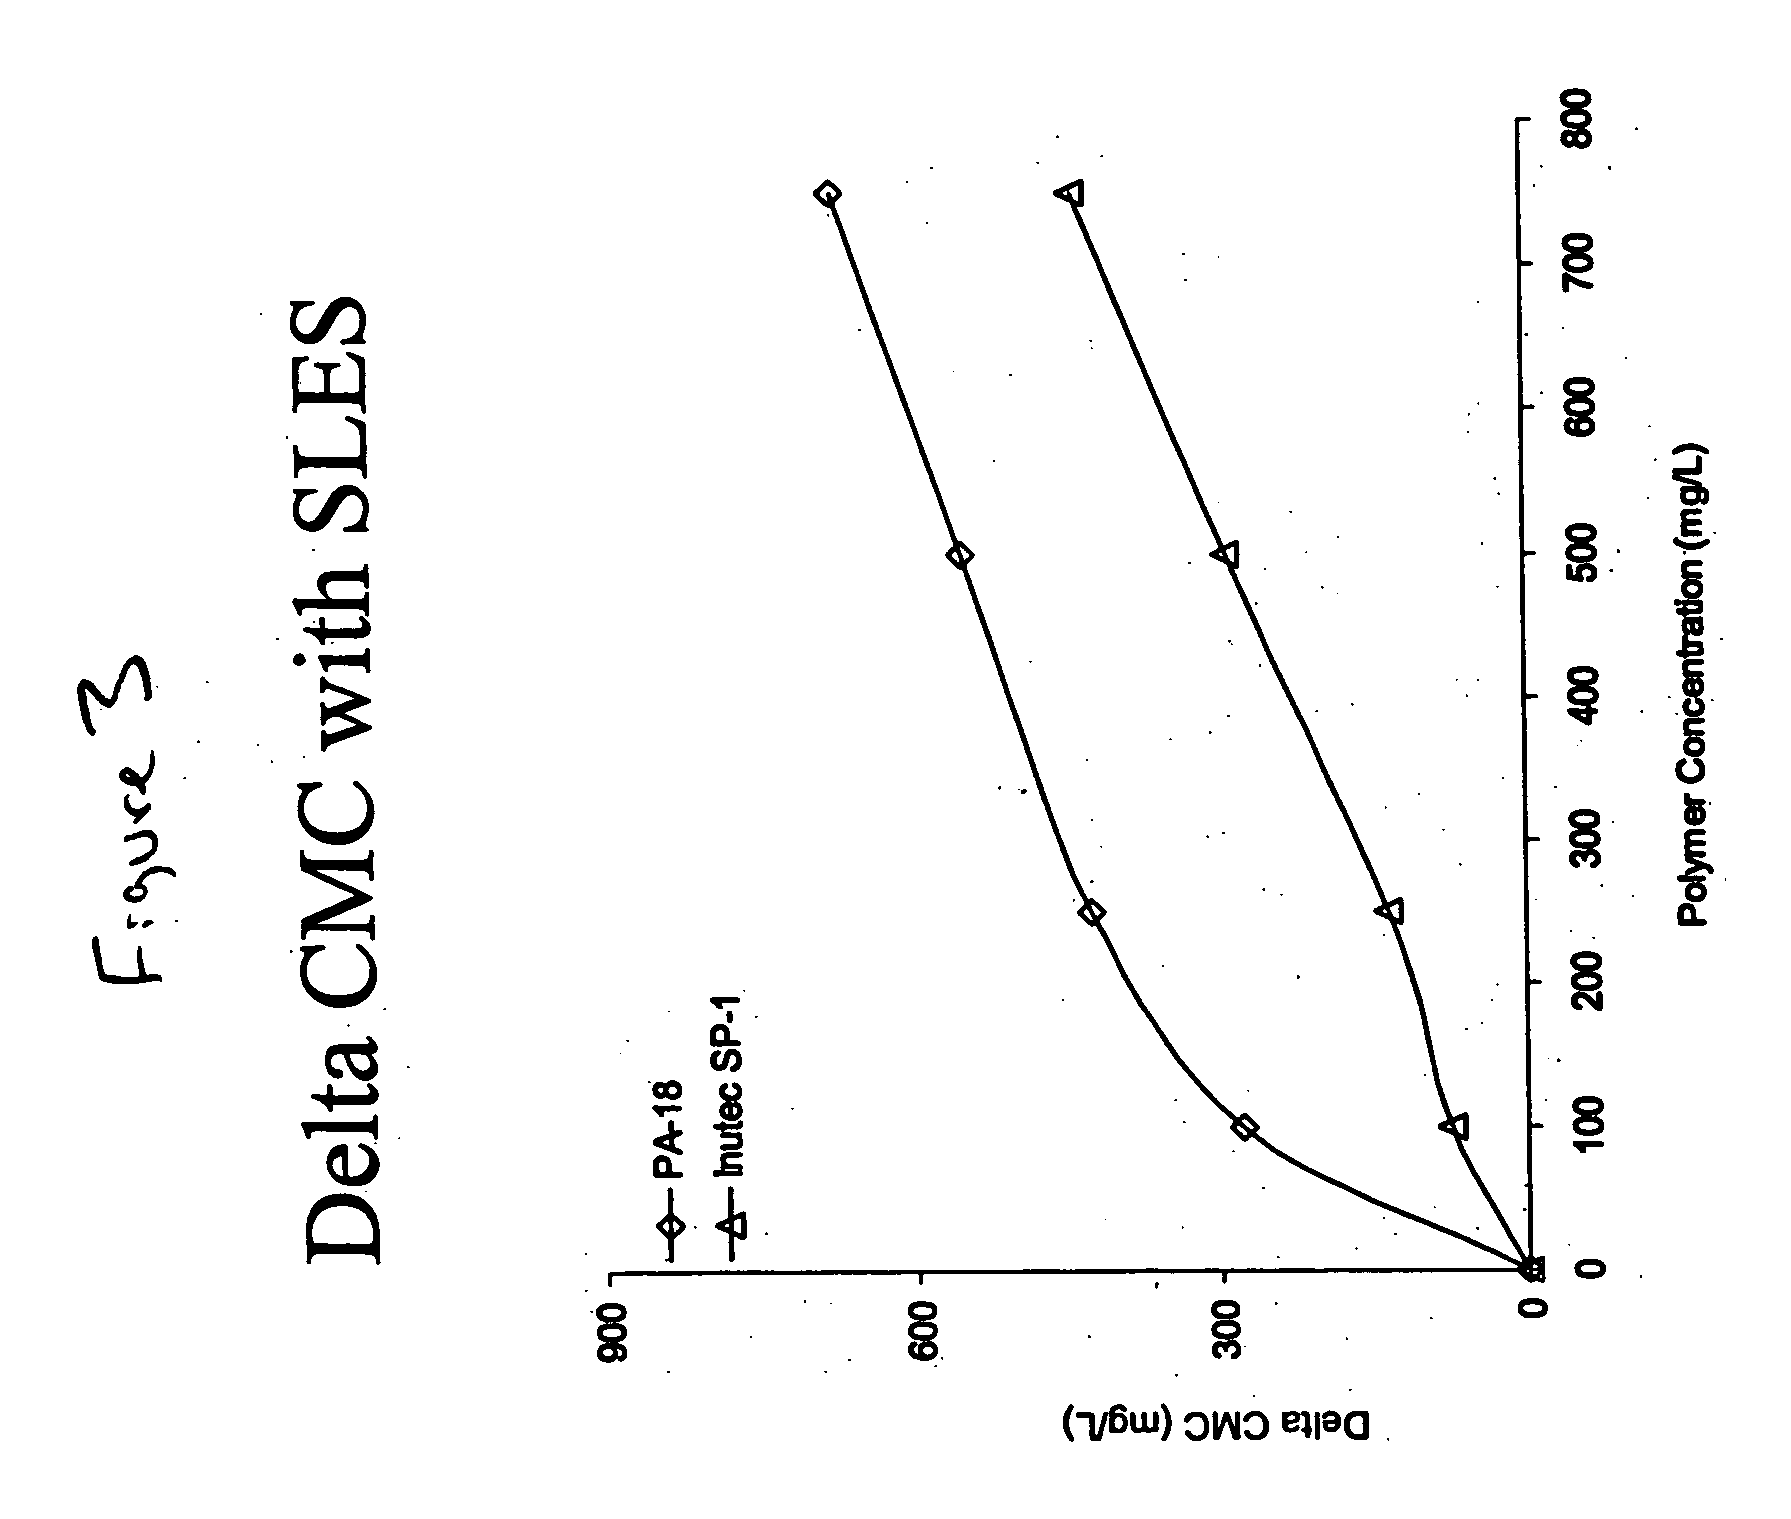 Low-irritation compositions and methods of making the same